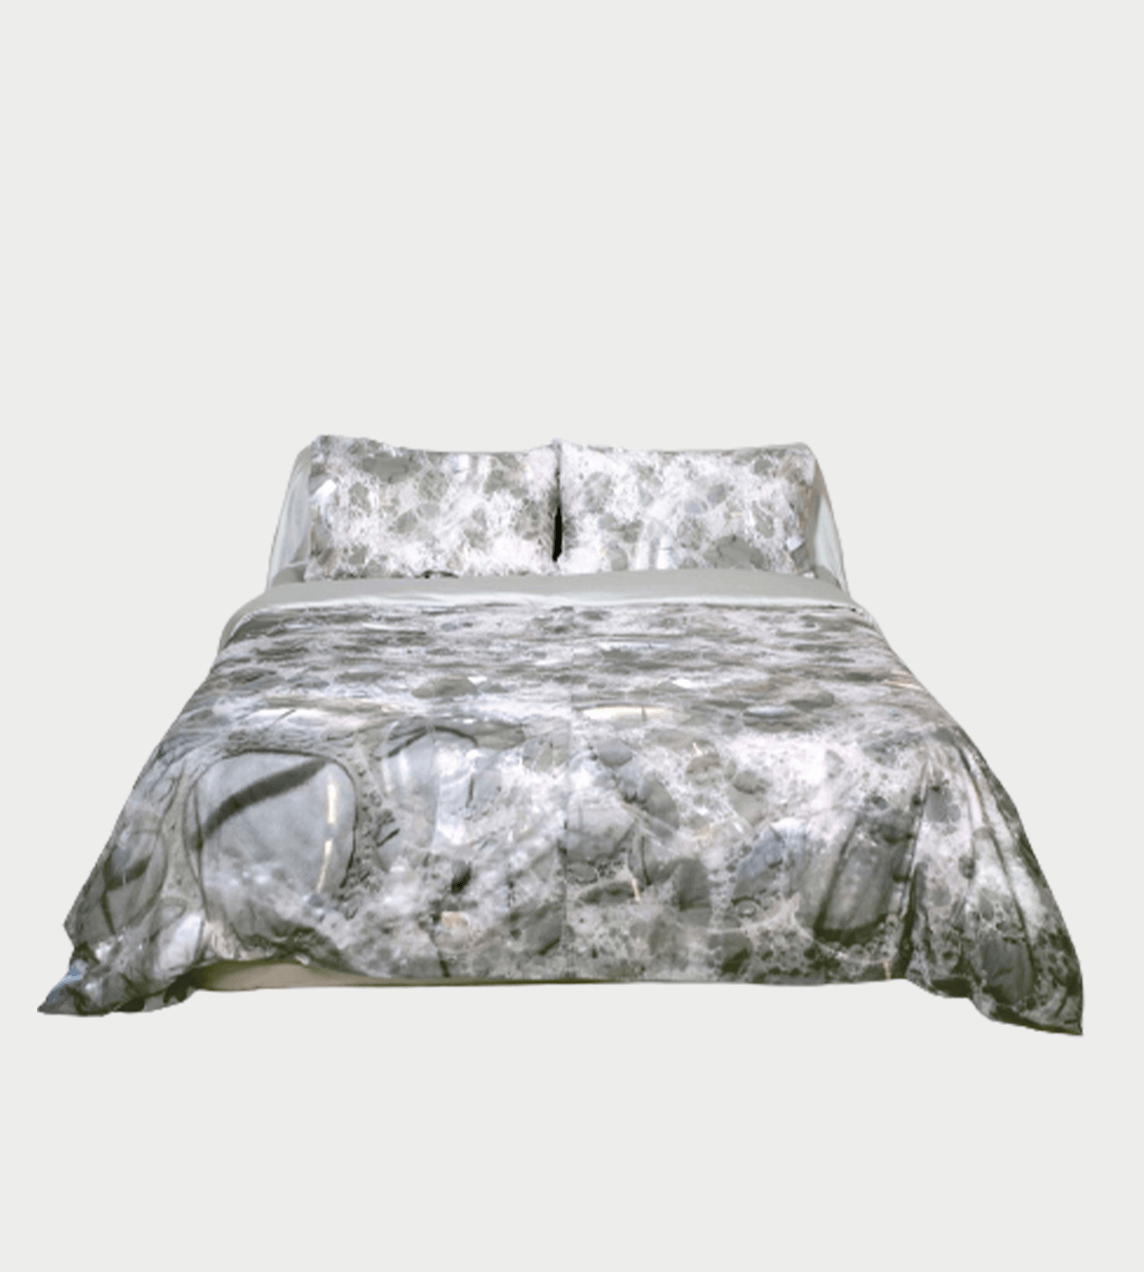  Serapis - 'Bubbles' Printed Bed Sheets King Size